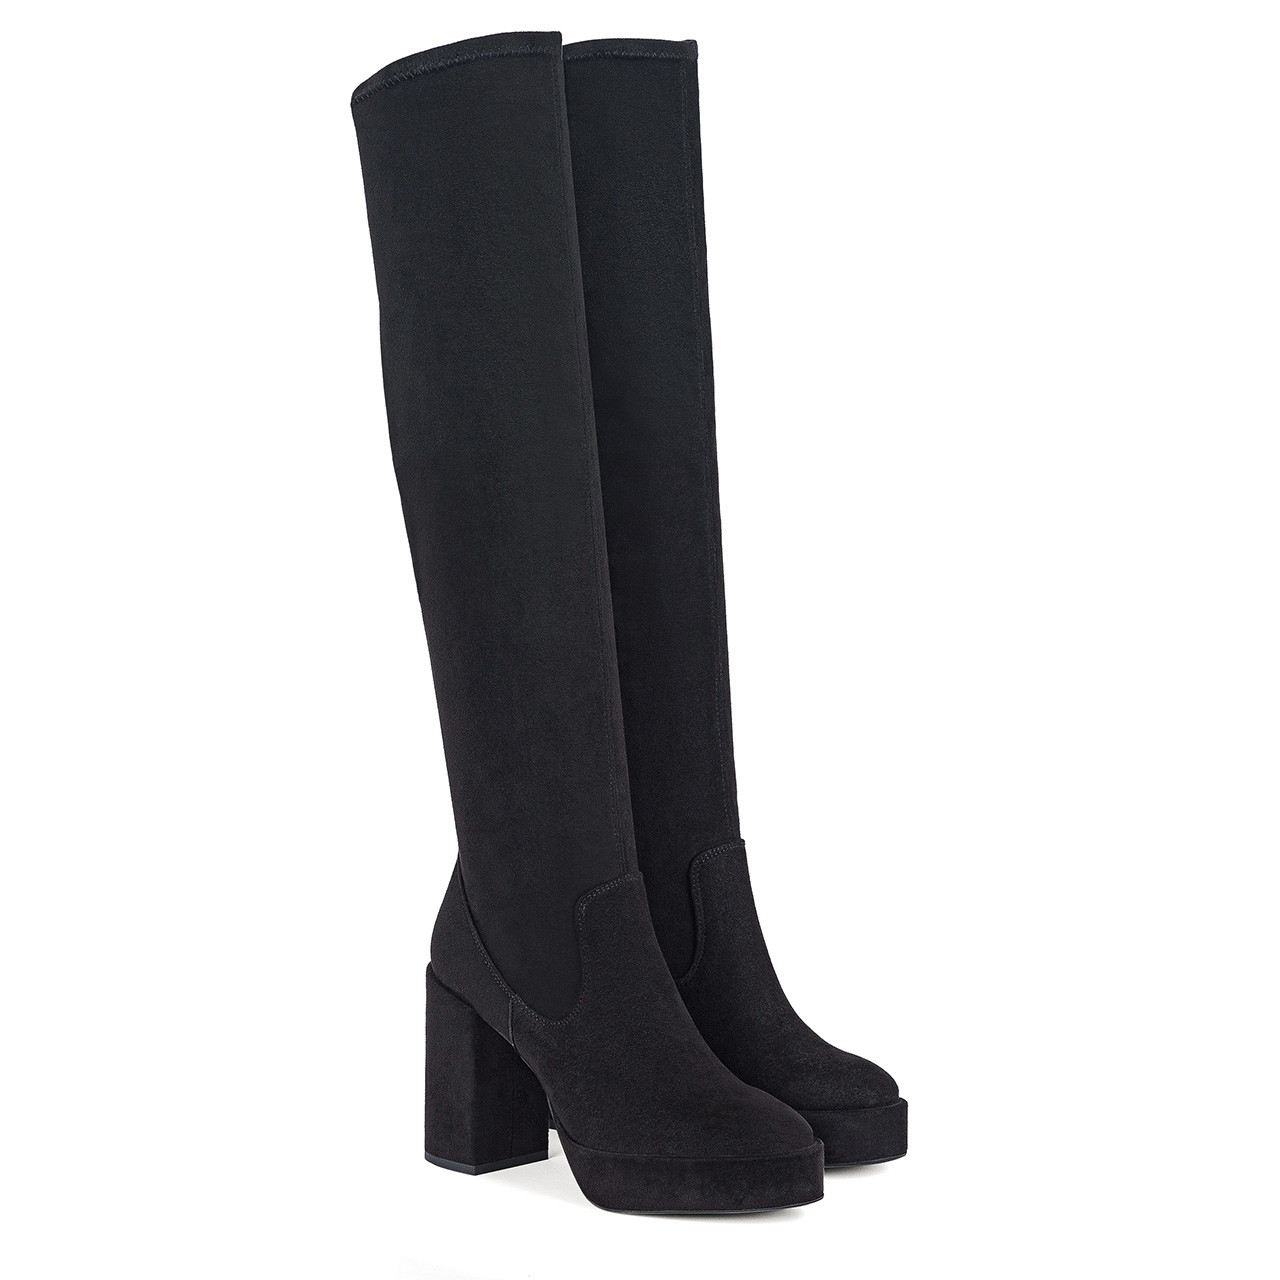 Black leather thigh high women’s boots with a fitted upper